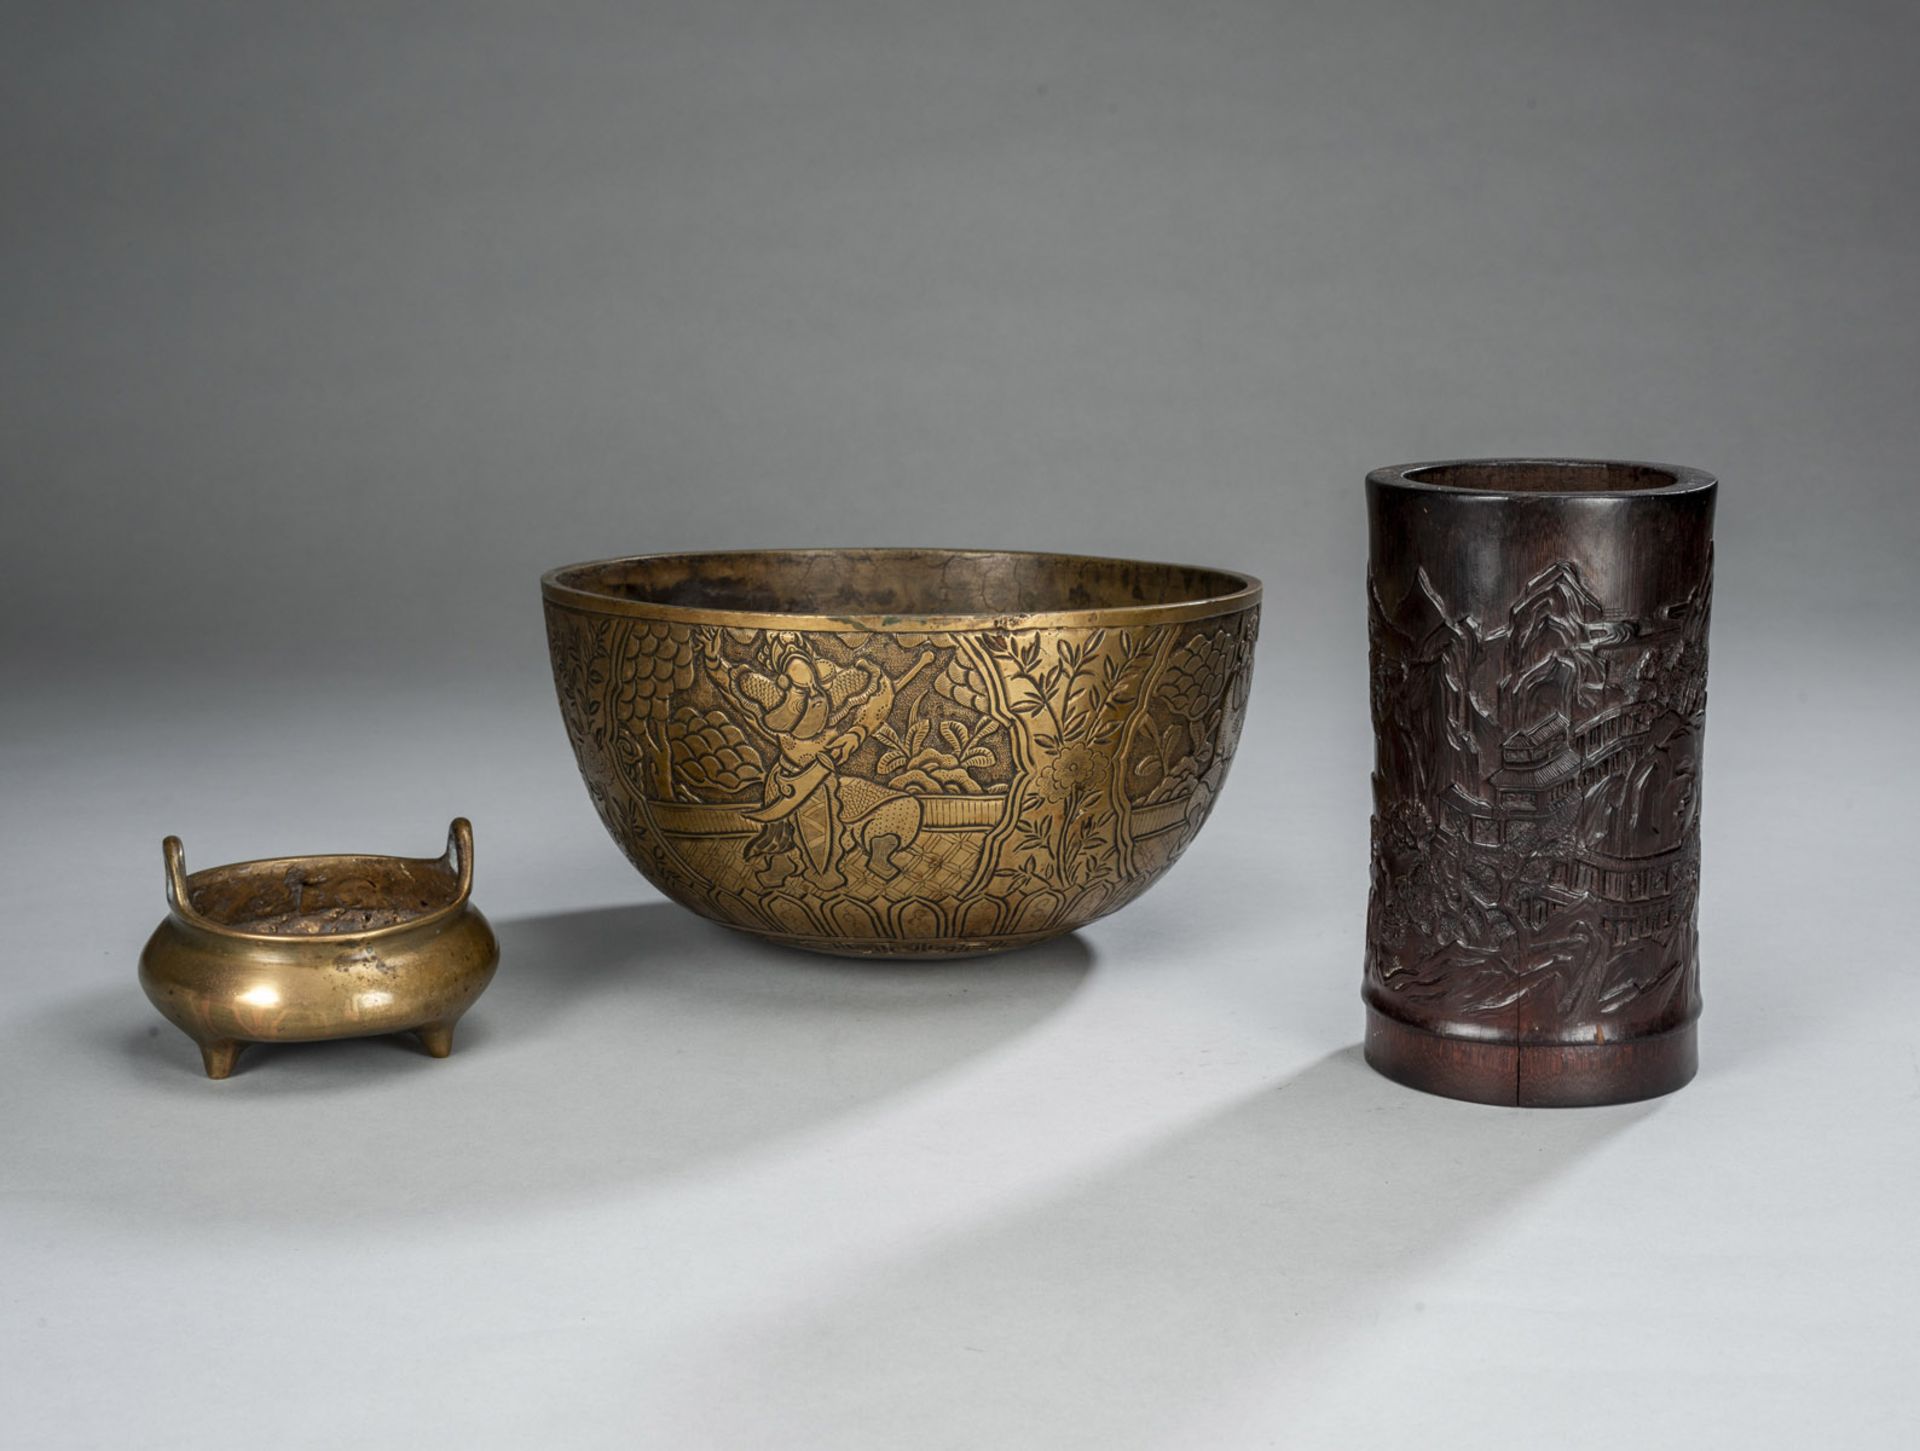 A BRONZE BOWL, A BRONZE INCENSE AND A BAMBOO BRUSH POT WITH A LAKE LANDSCAPE IN RELIEF